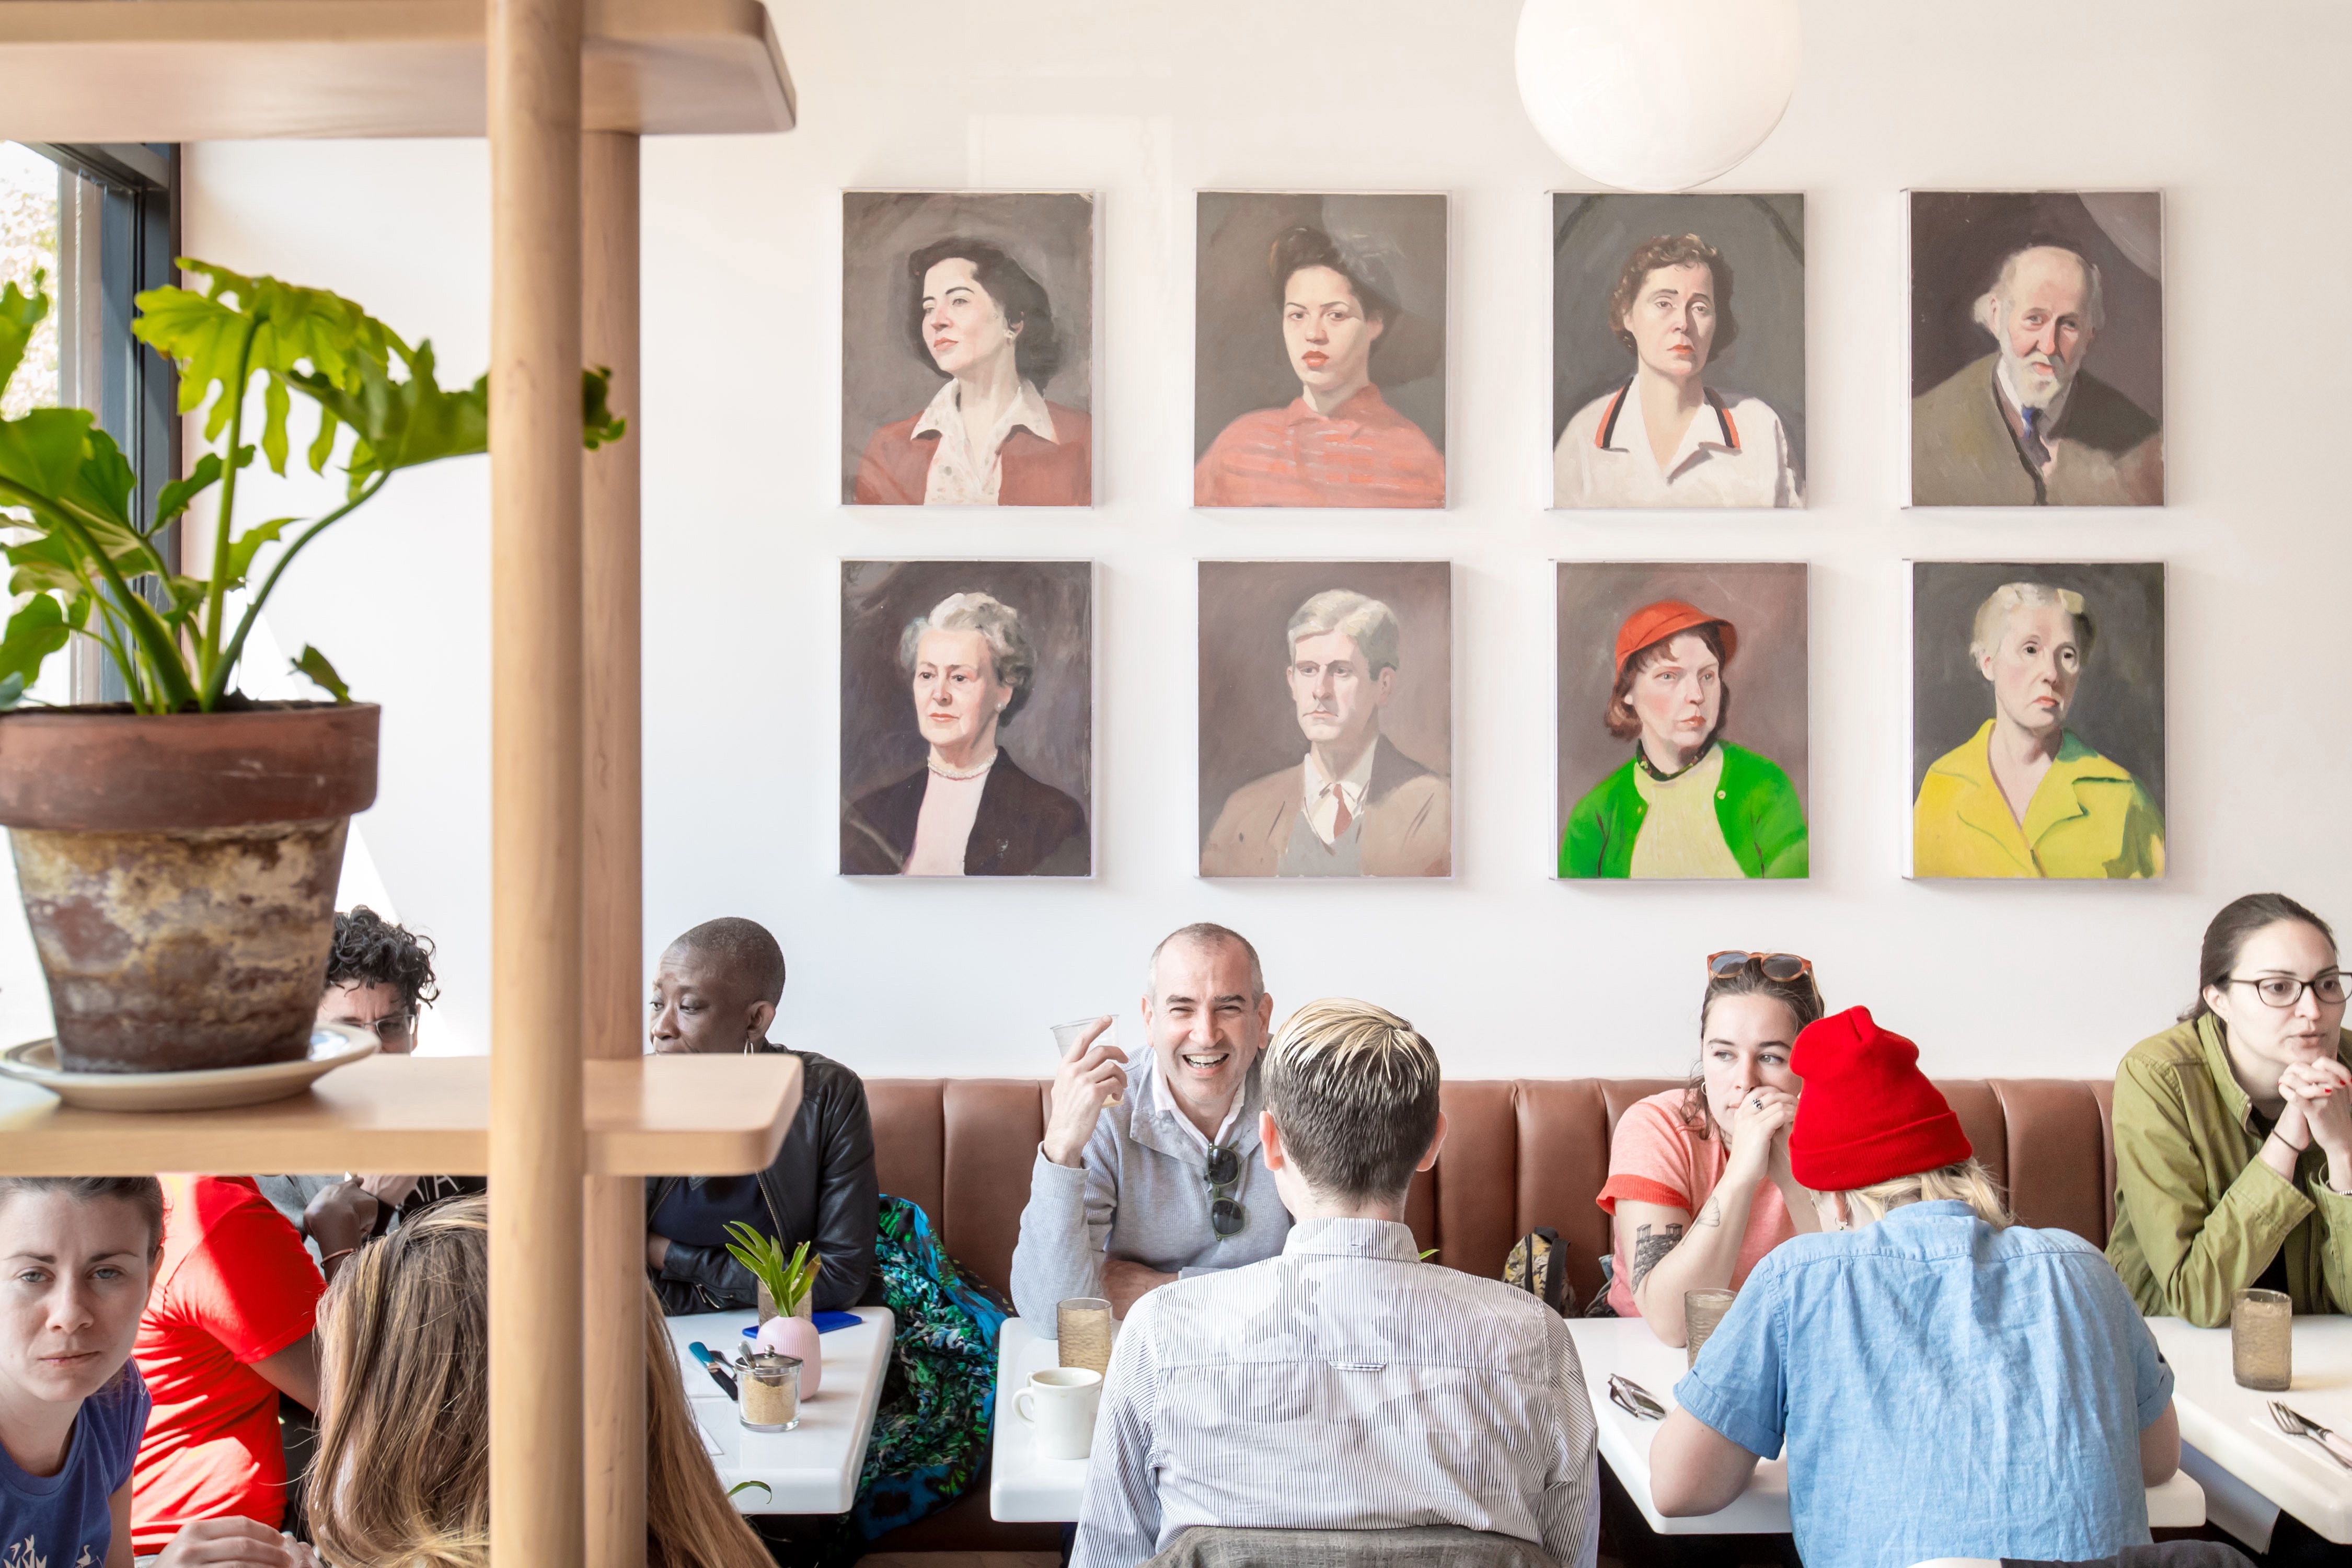 Diners sit in tables in a row with portraits hanging on a wall above them